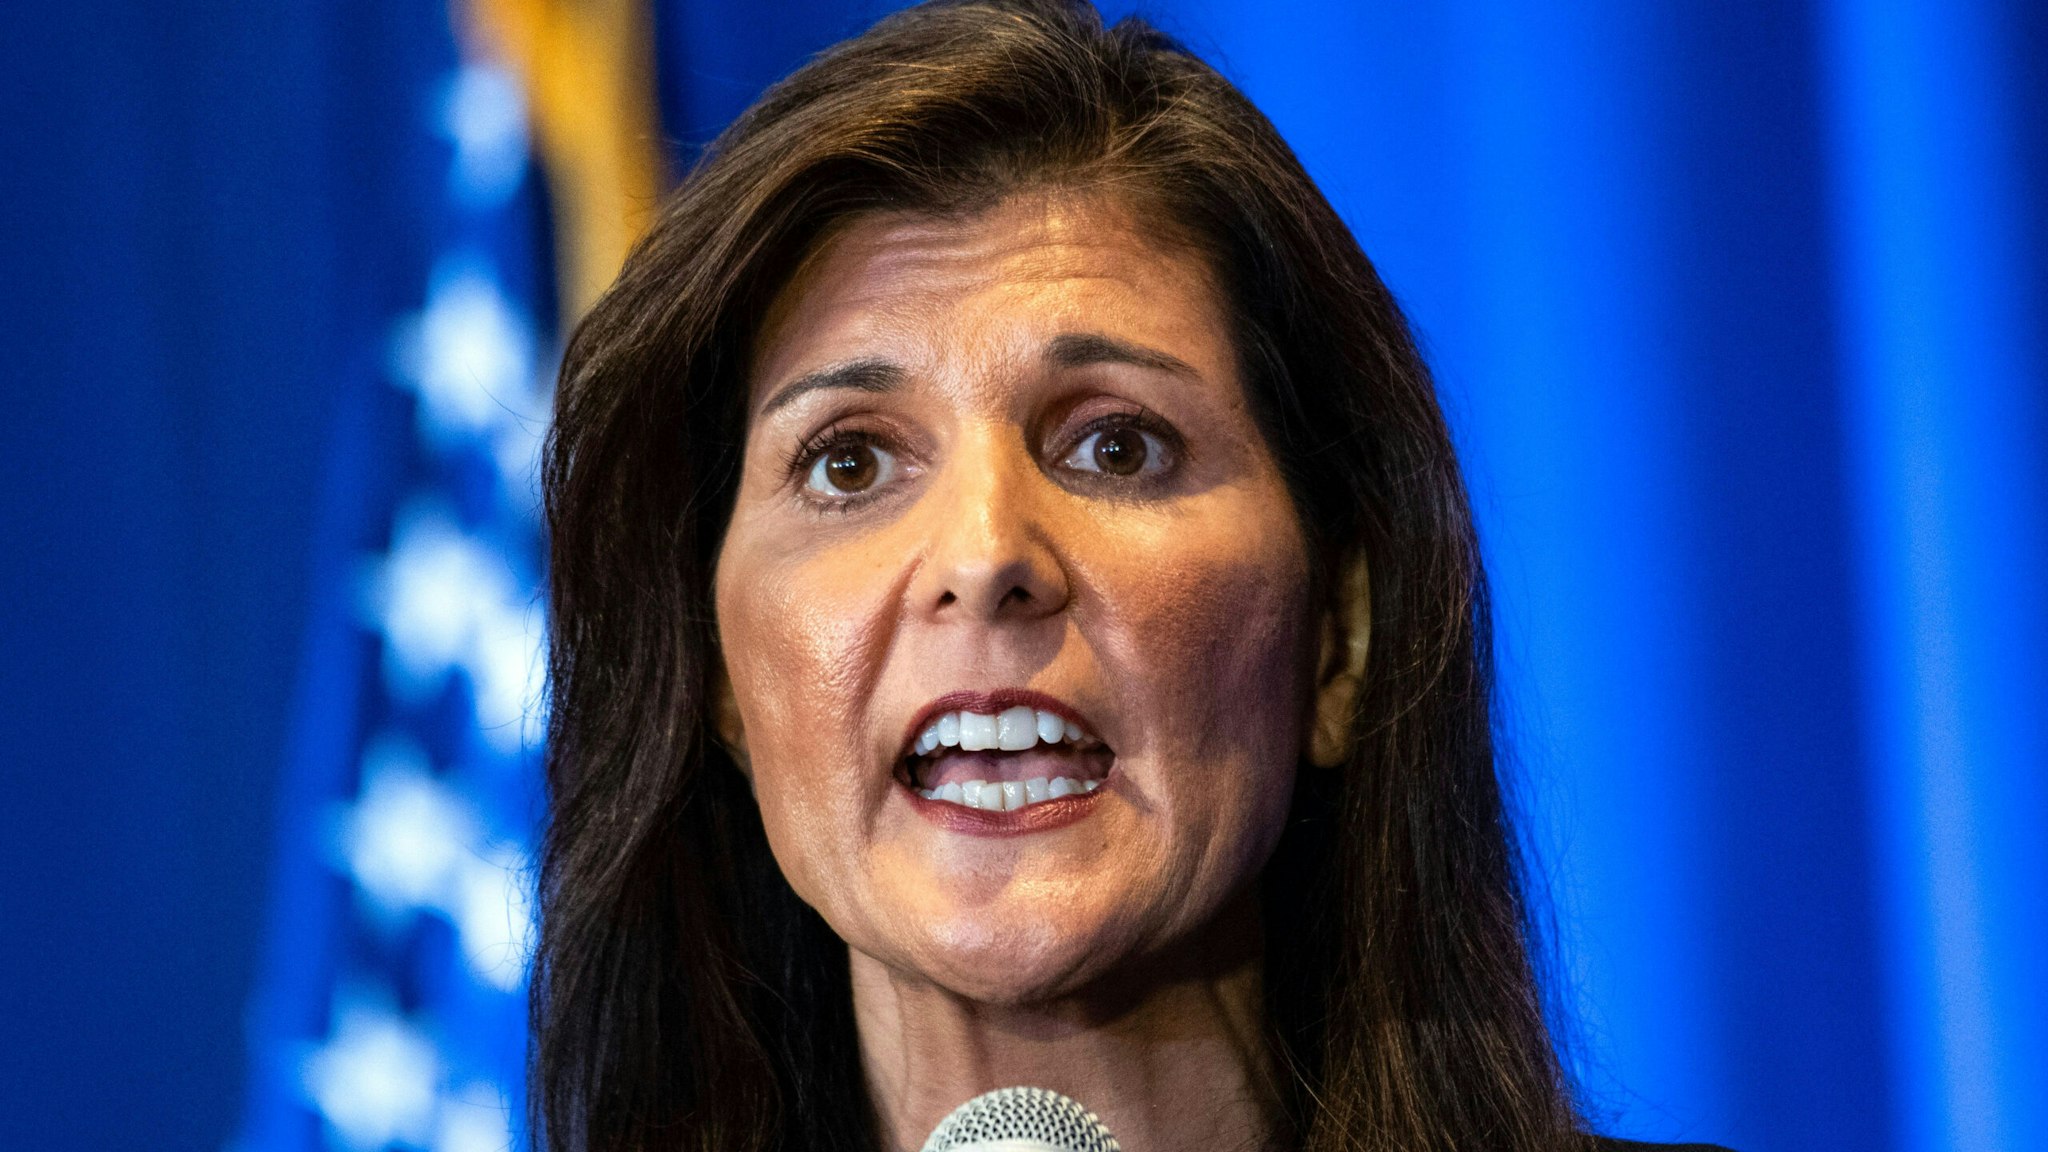 US 2024 Republican presidential hopeful and former United Nations ambassador Nikki Haley speaks at the New Hampshire Republican Party's First in the Nation Leadership Summit in Nashua, New Hampshire, on October 13, 2023.